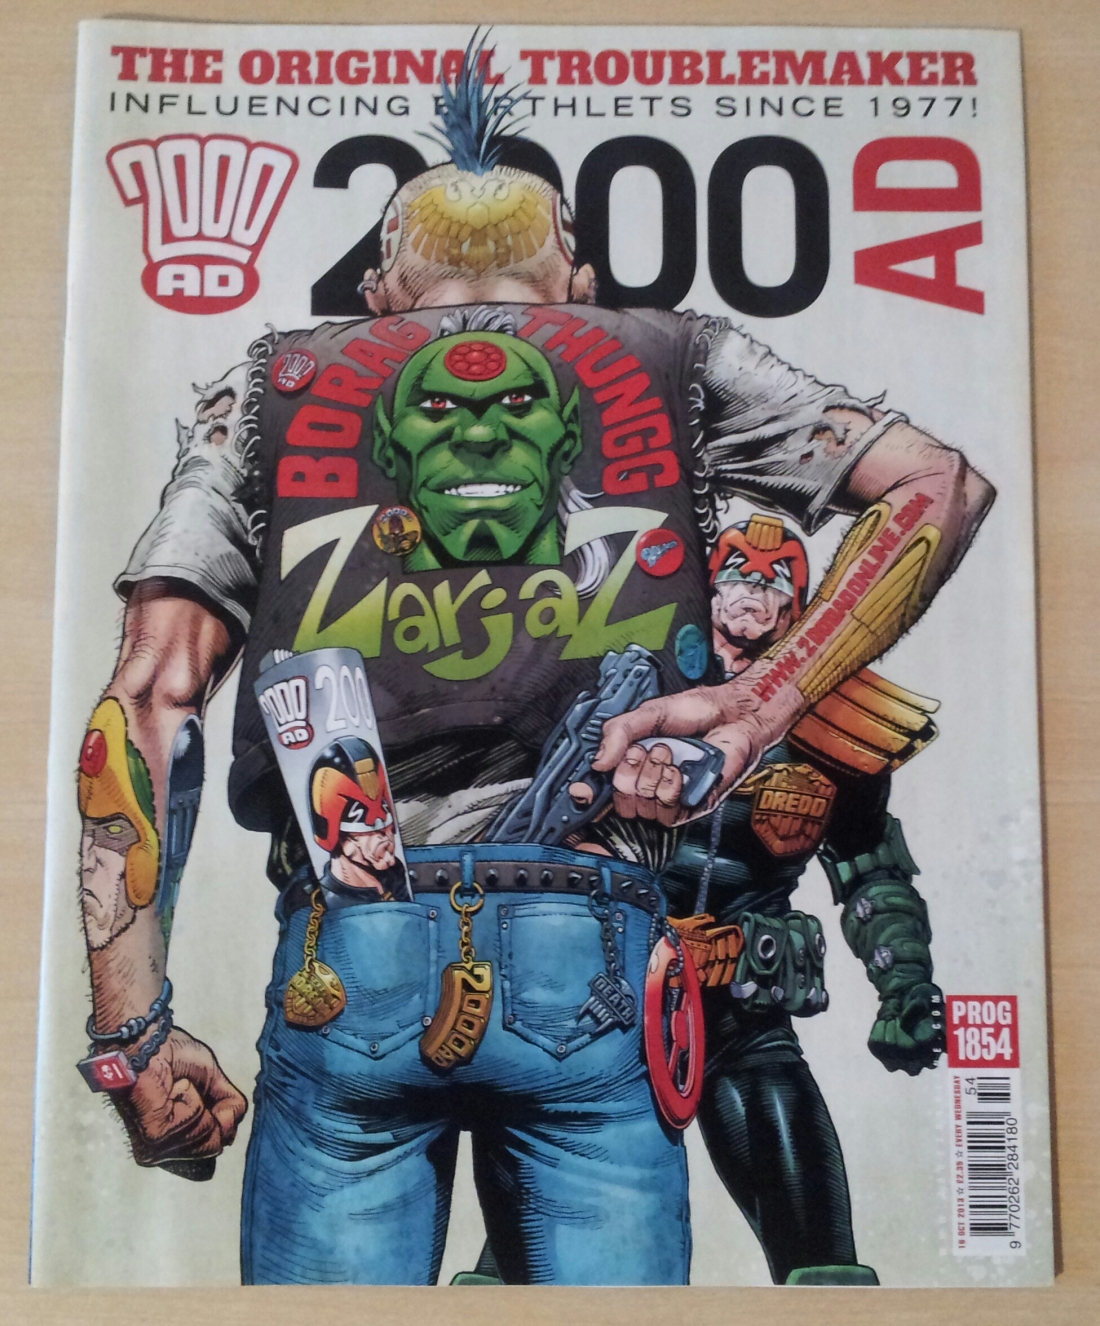 2000AD PROG 1854 REVIEW